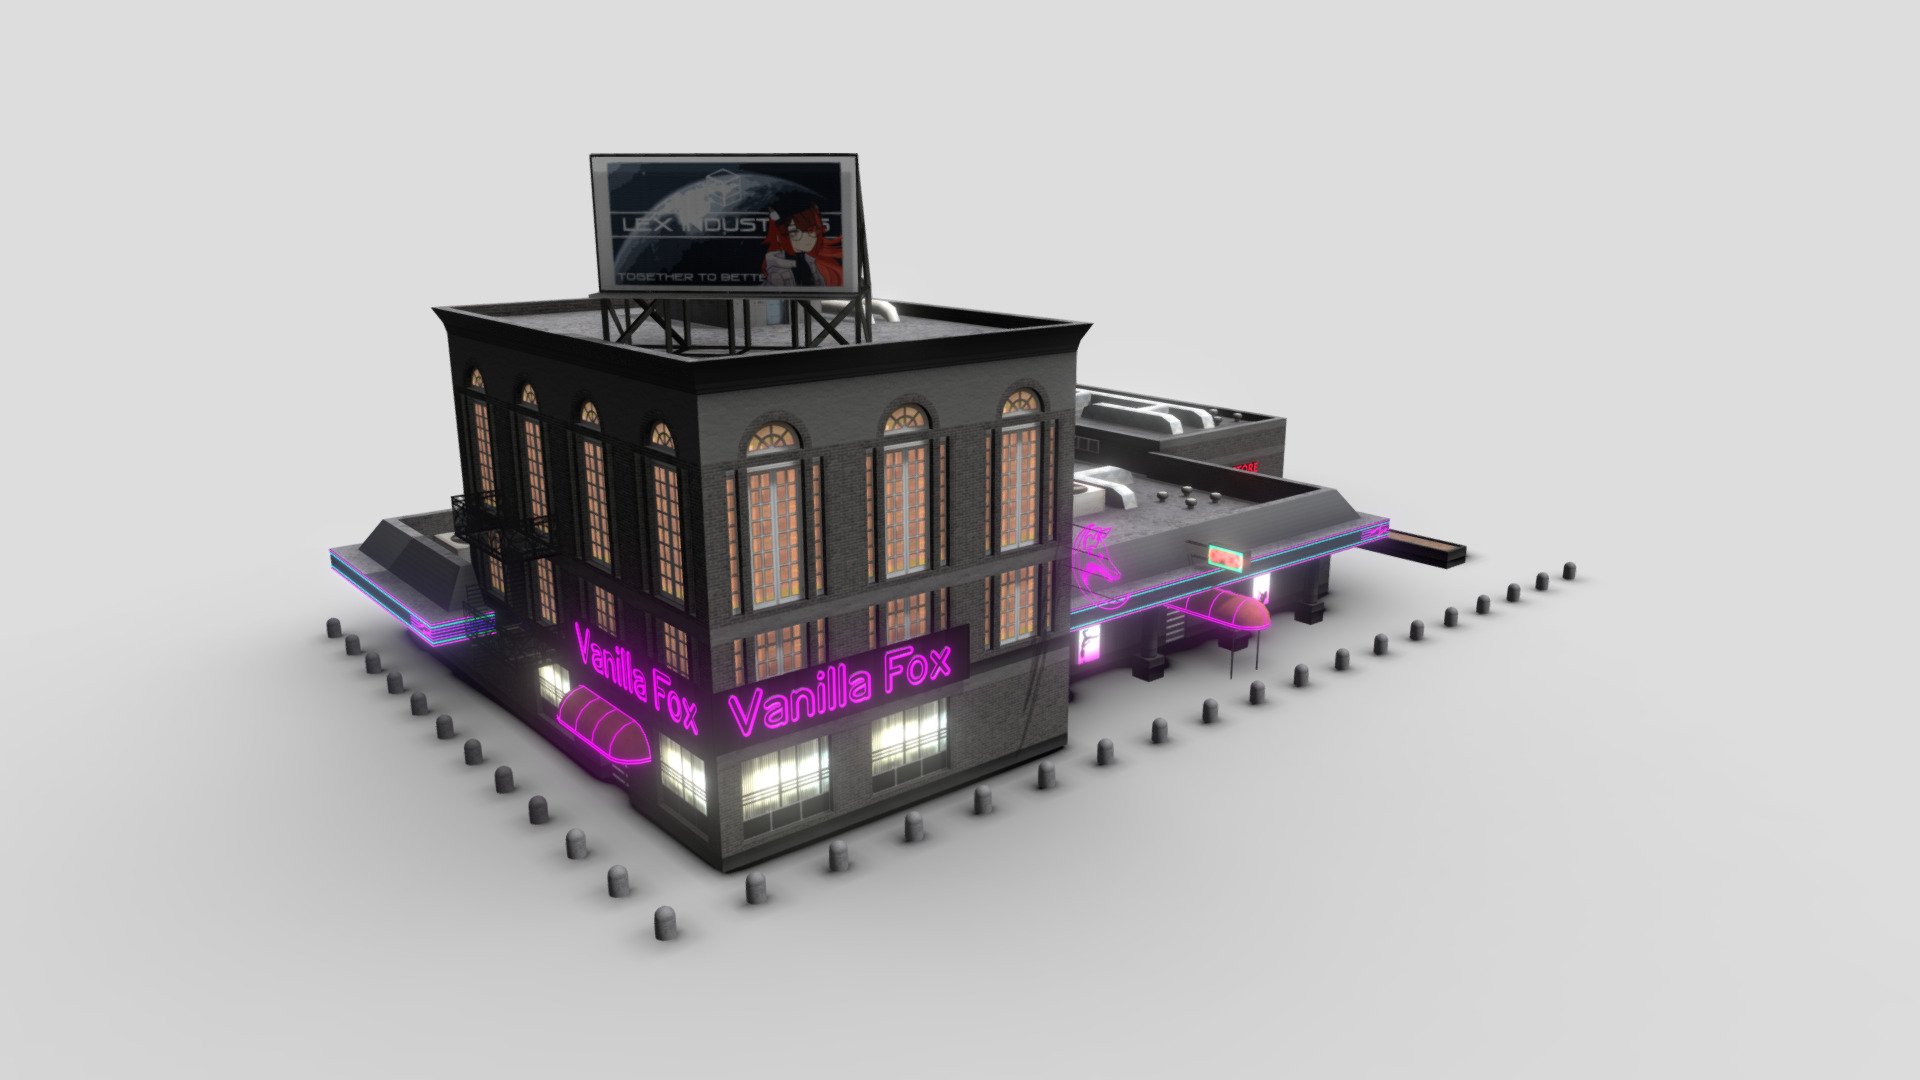 Fictional building, up to 2k diffuse textures, up to 1k other texture maps. 

Made as an asset for Workers &amp; Resources: Soviet Republic.

You can check workshop item here - Vanilla Fox Dancing Club - 3D model by Lex713 (@LunarEclips3) 3d model